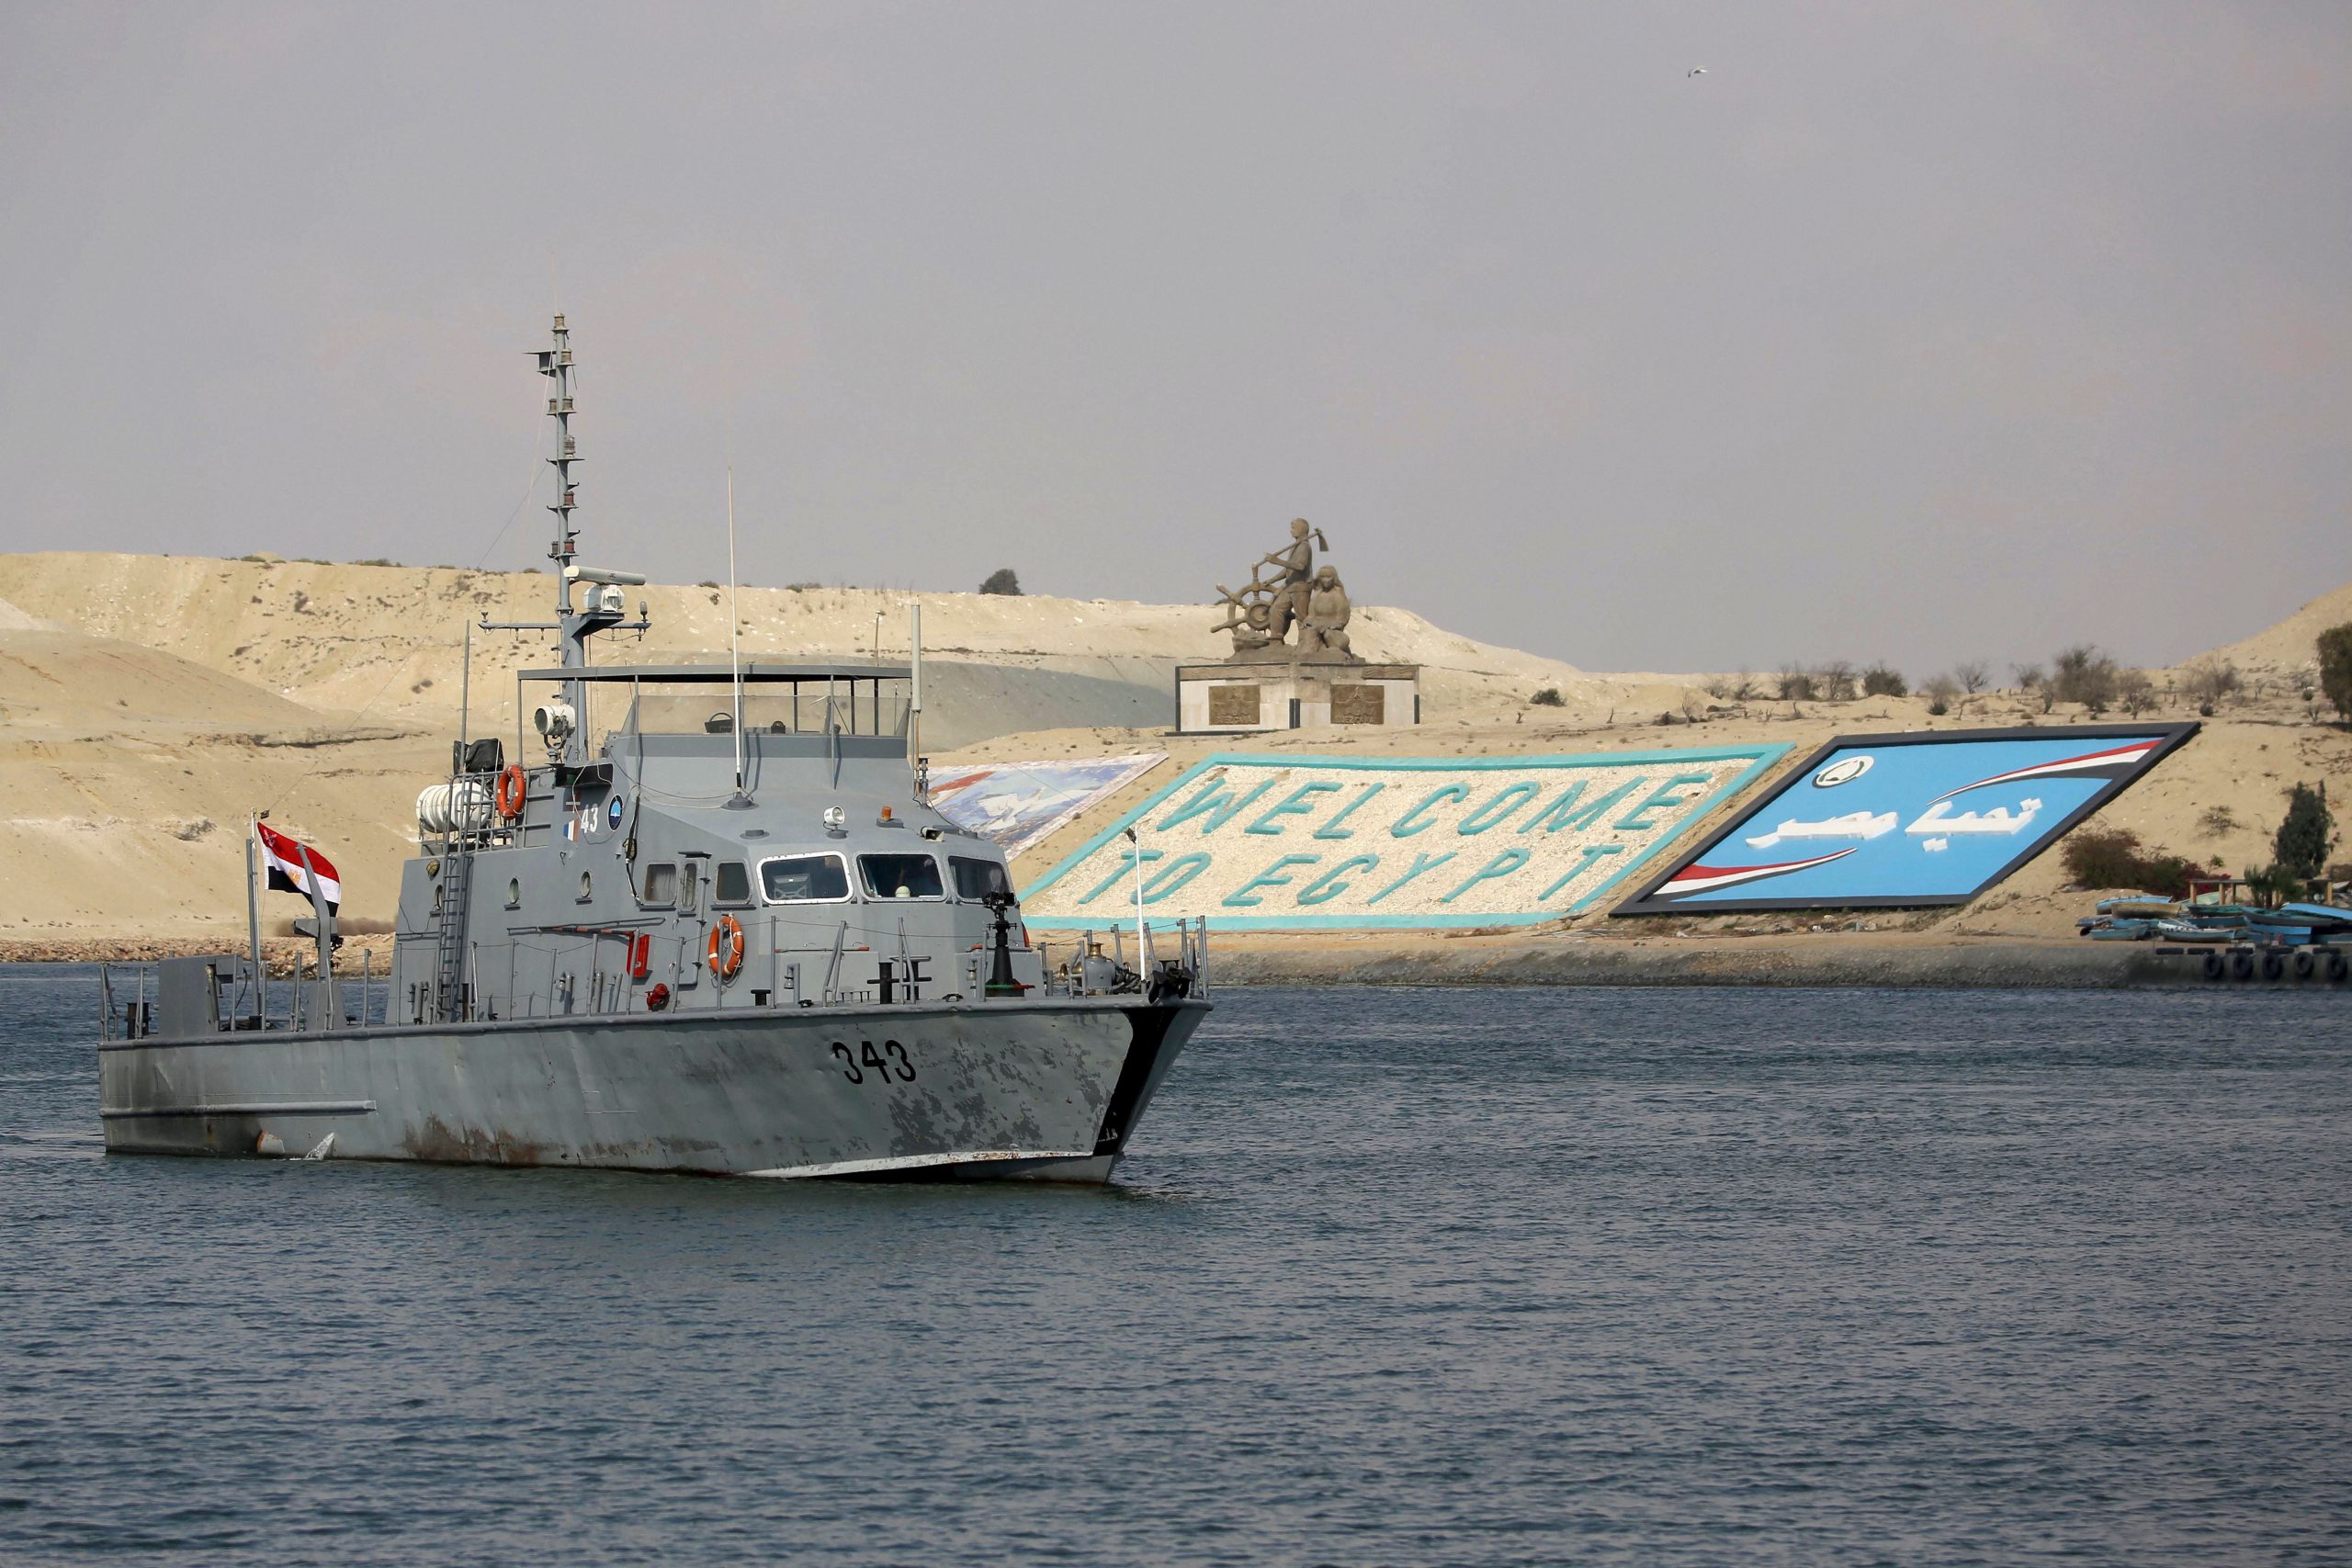 Suez Canal traffic cleared nearly a week after ship blocking it was refloated